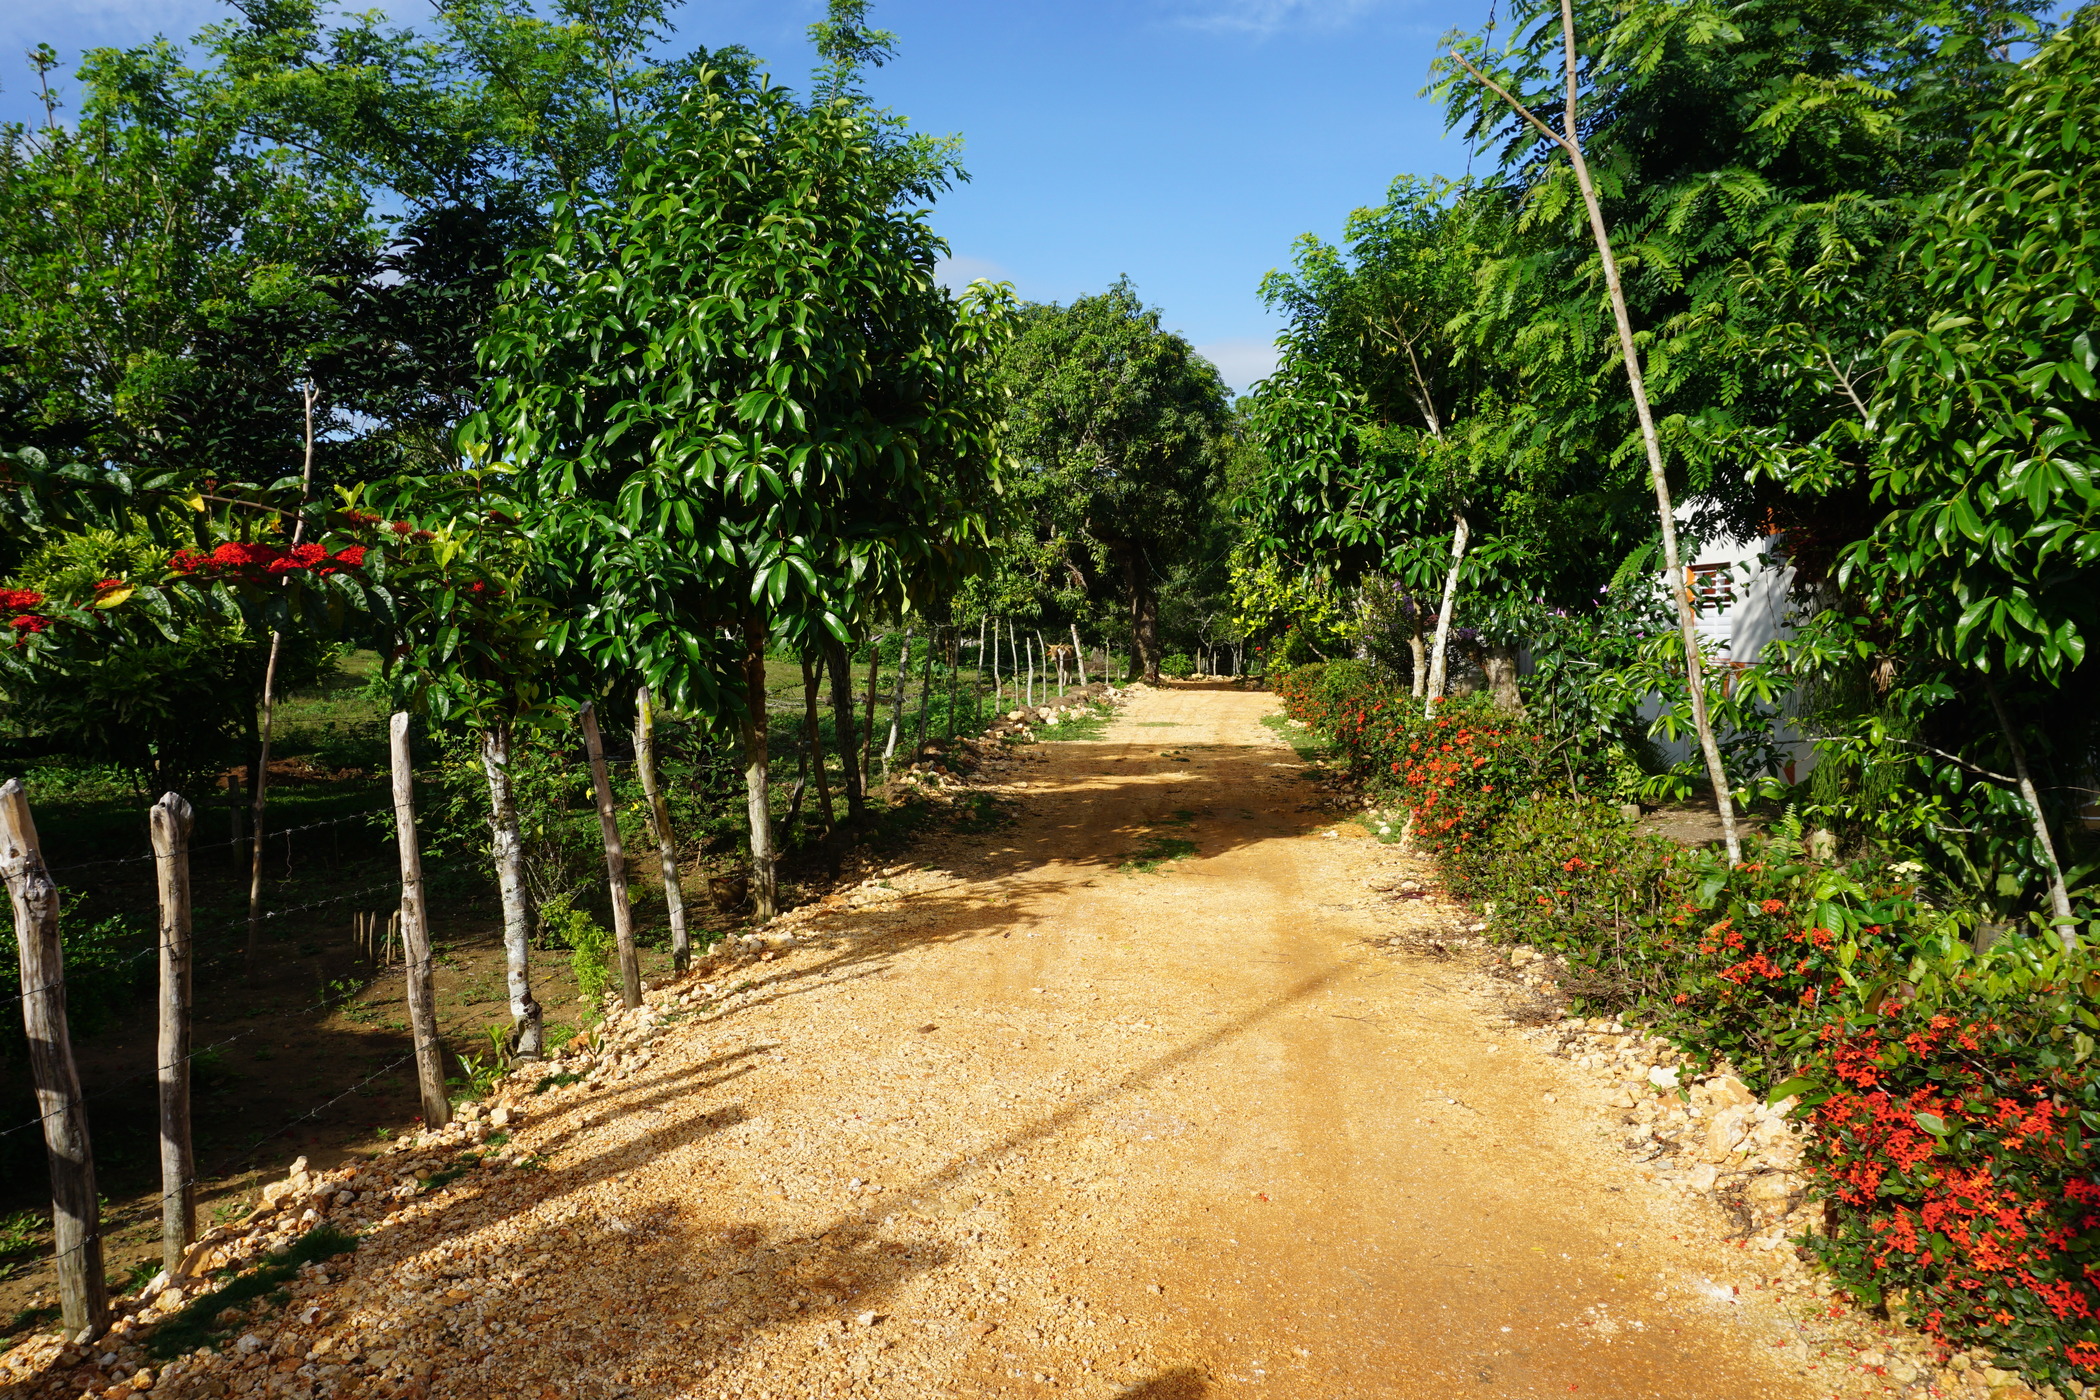 A well-maintained dirt road passes through green trees